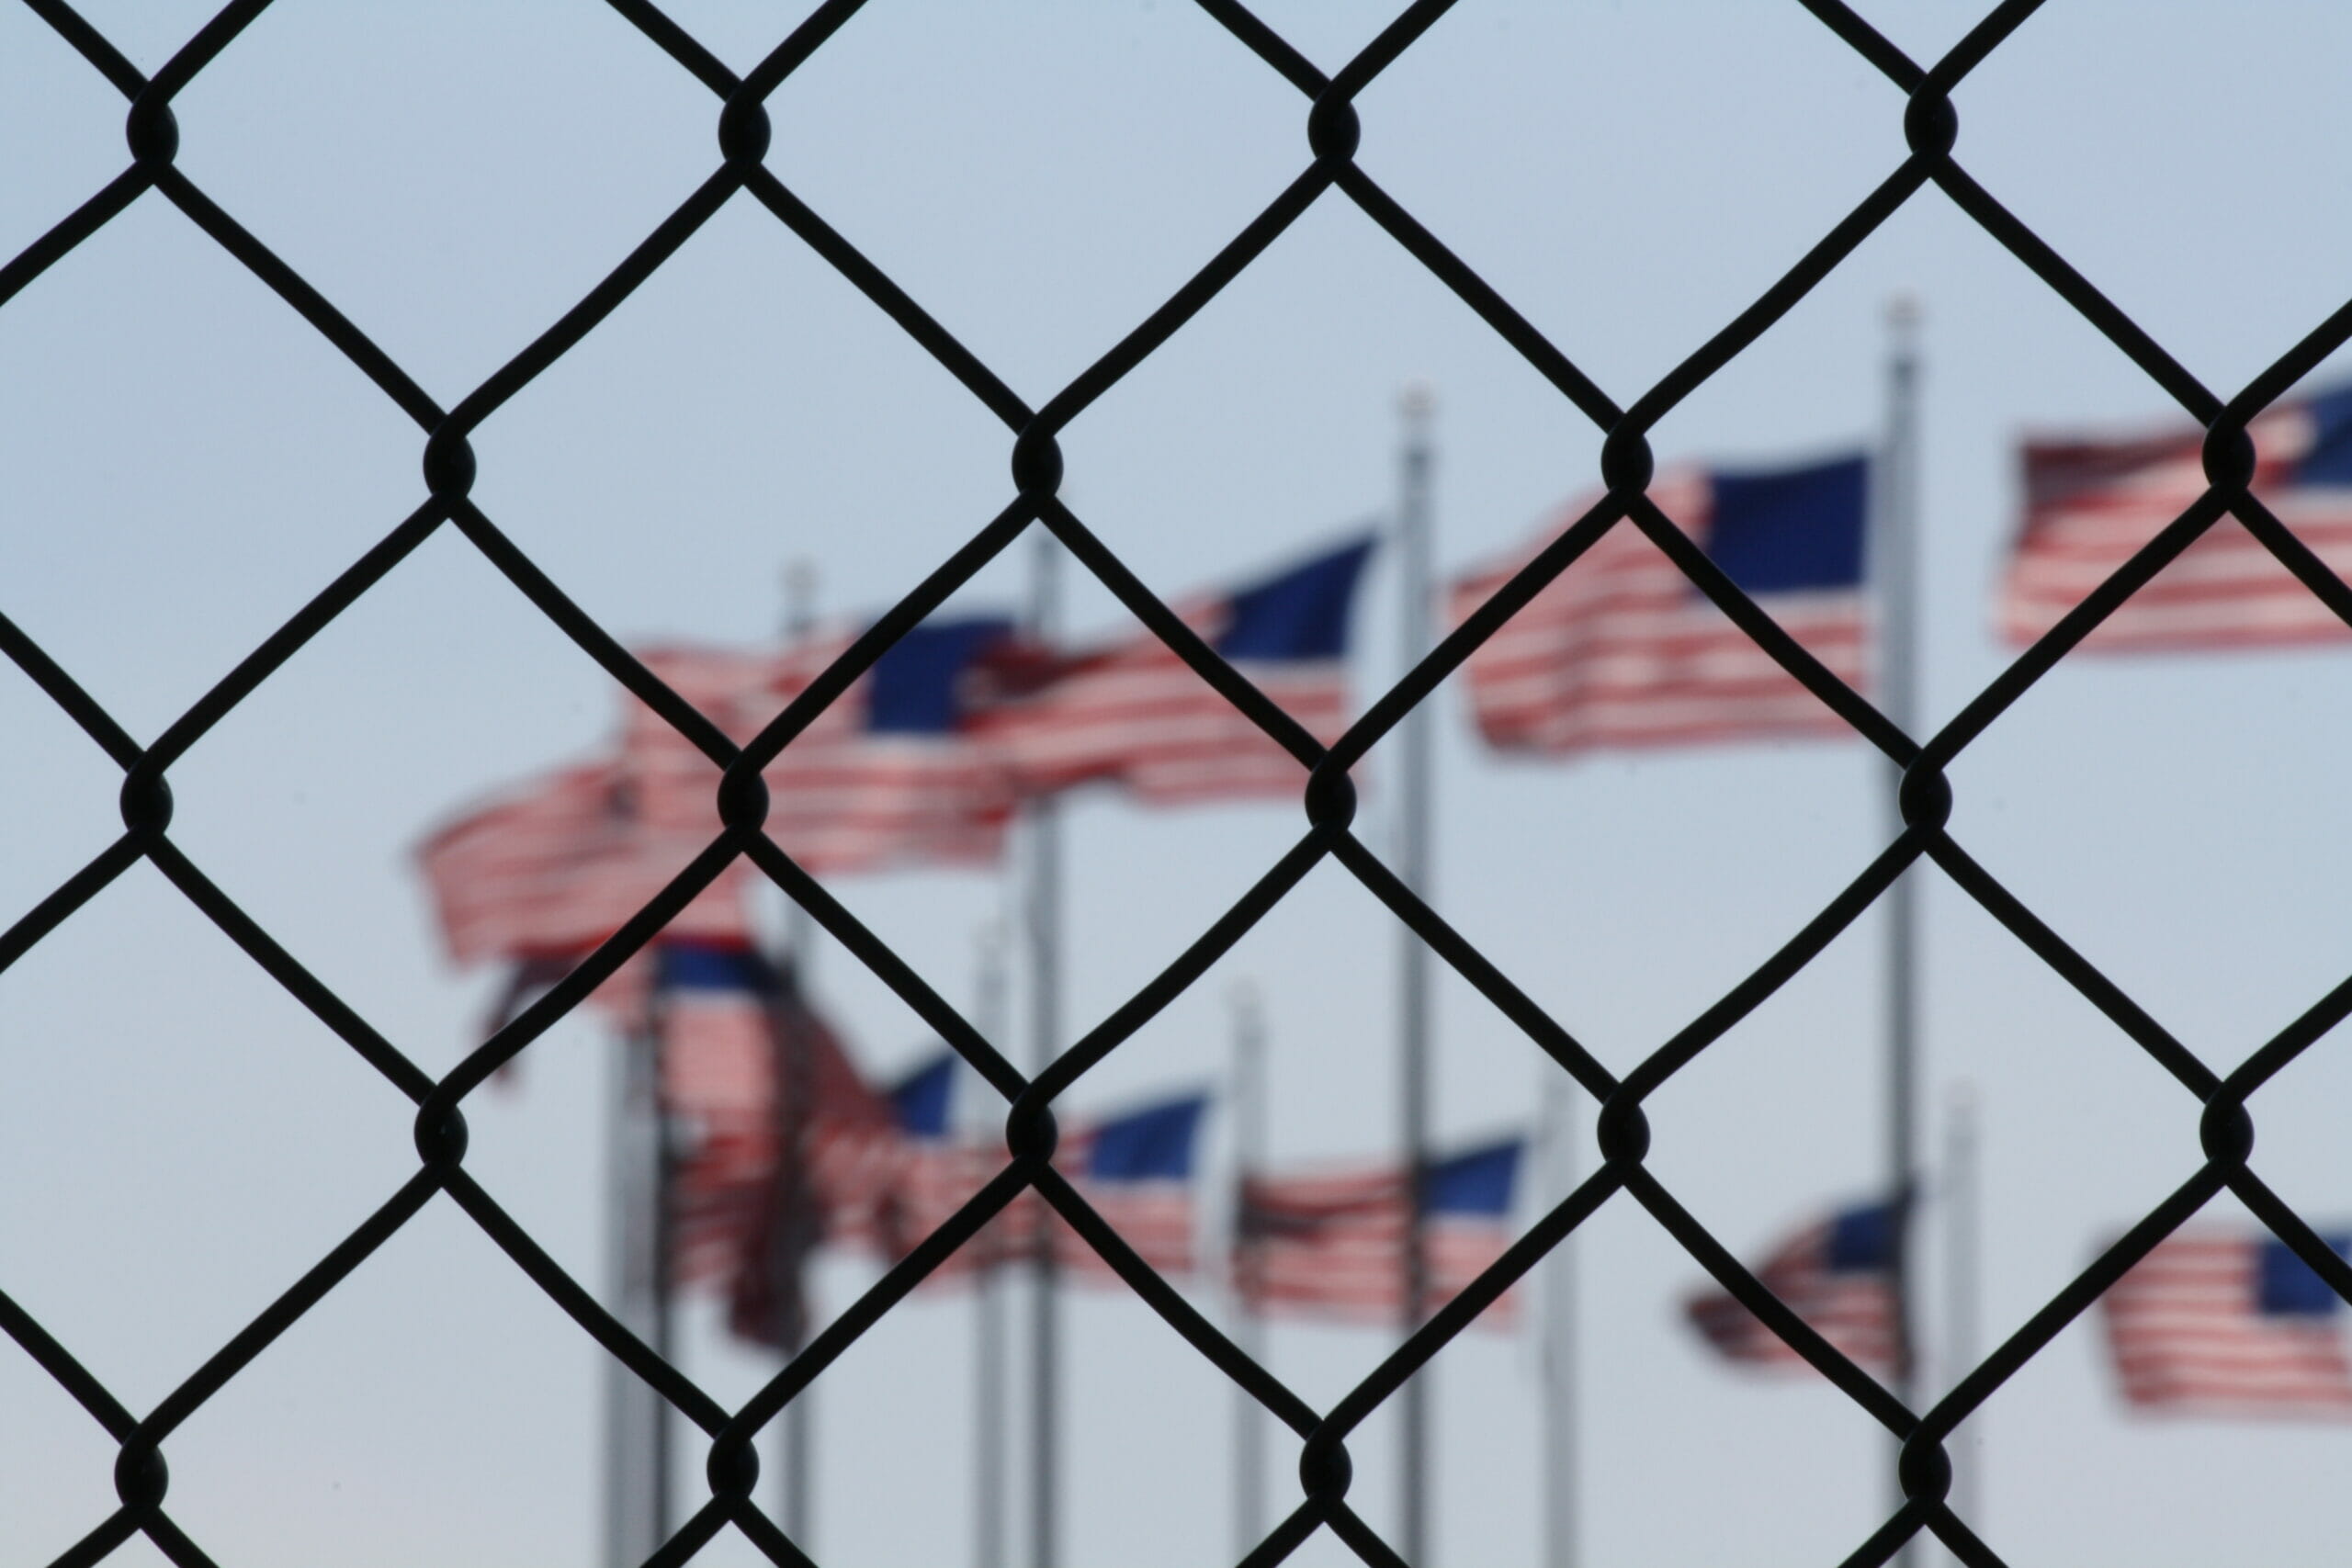 American flags behind a border fence